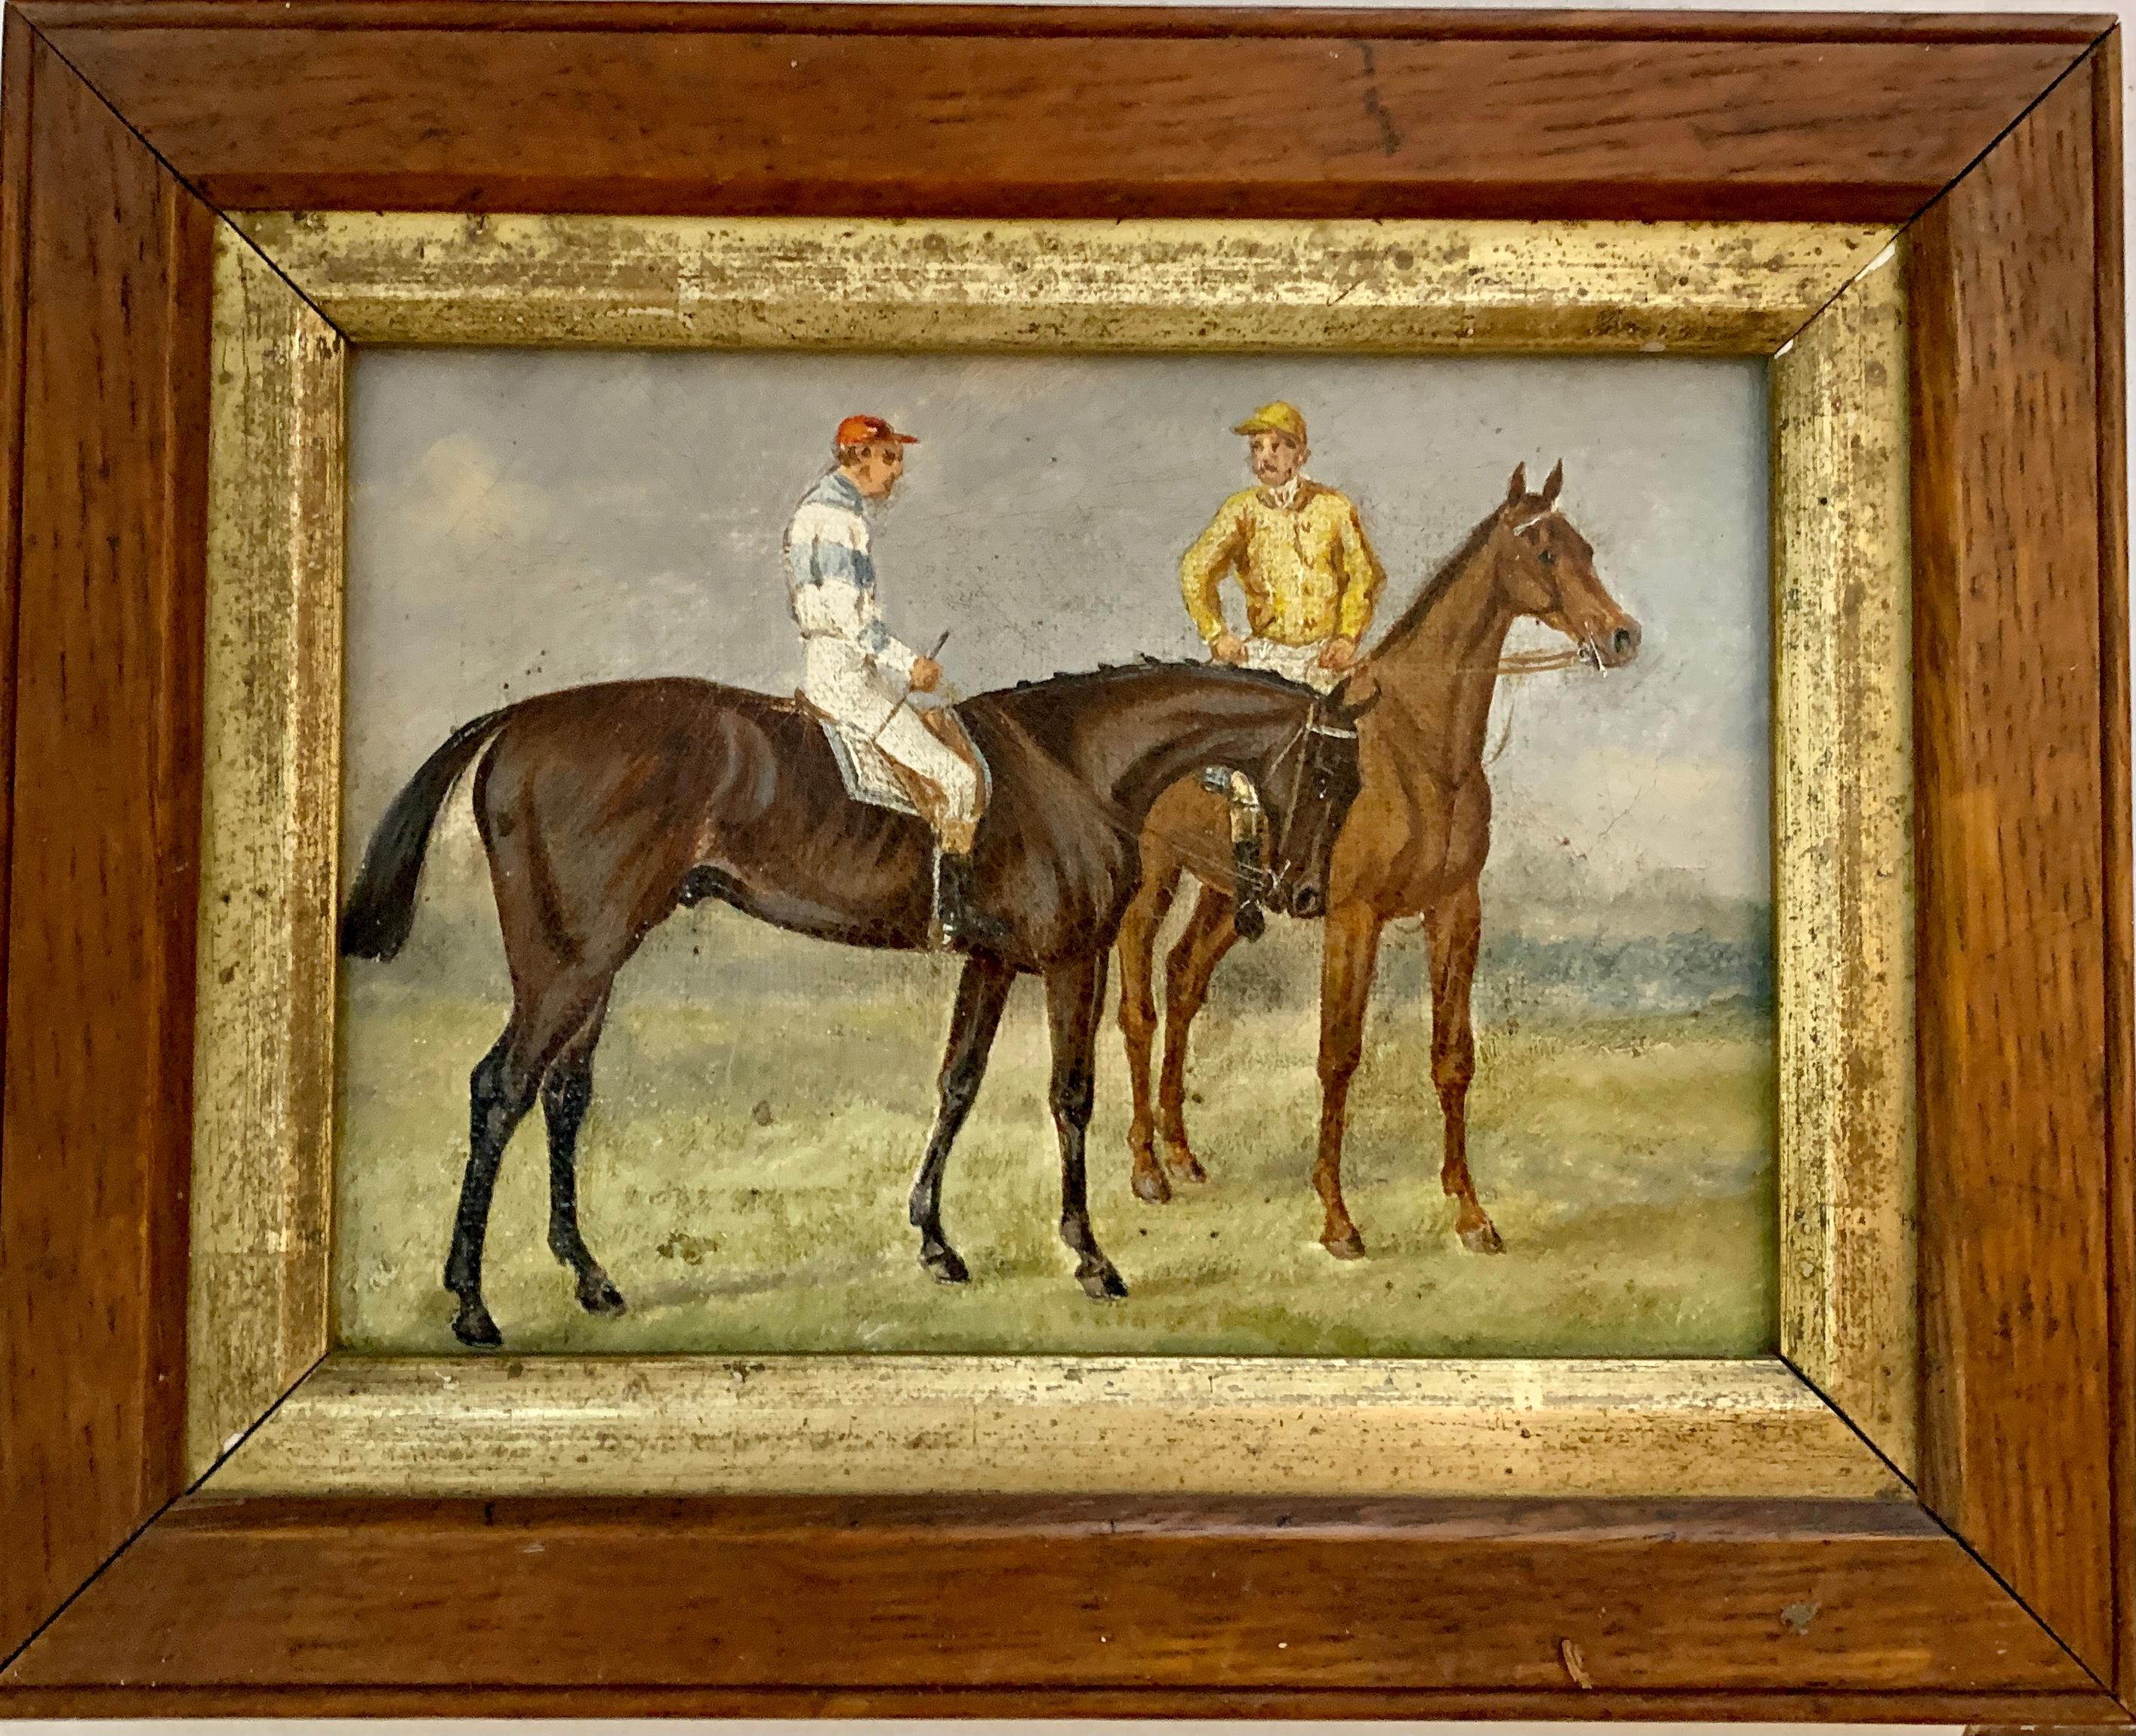 19th century English Horse racing scene with jockeys on horse back in landscape - Painting by Unknown